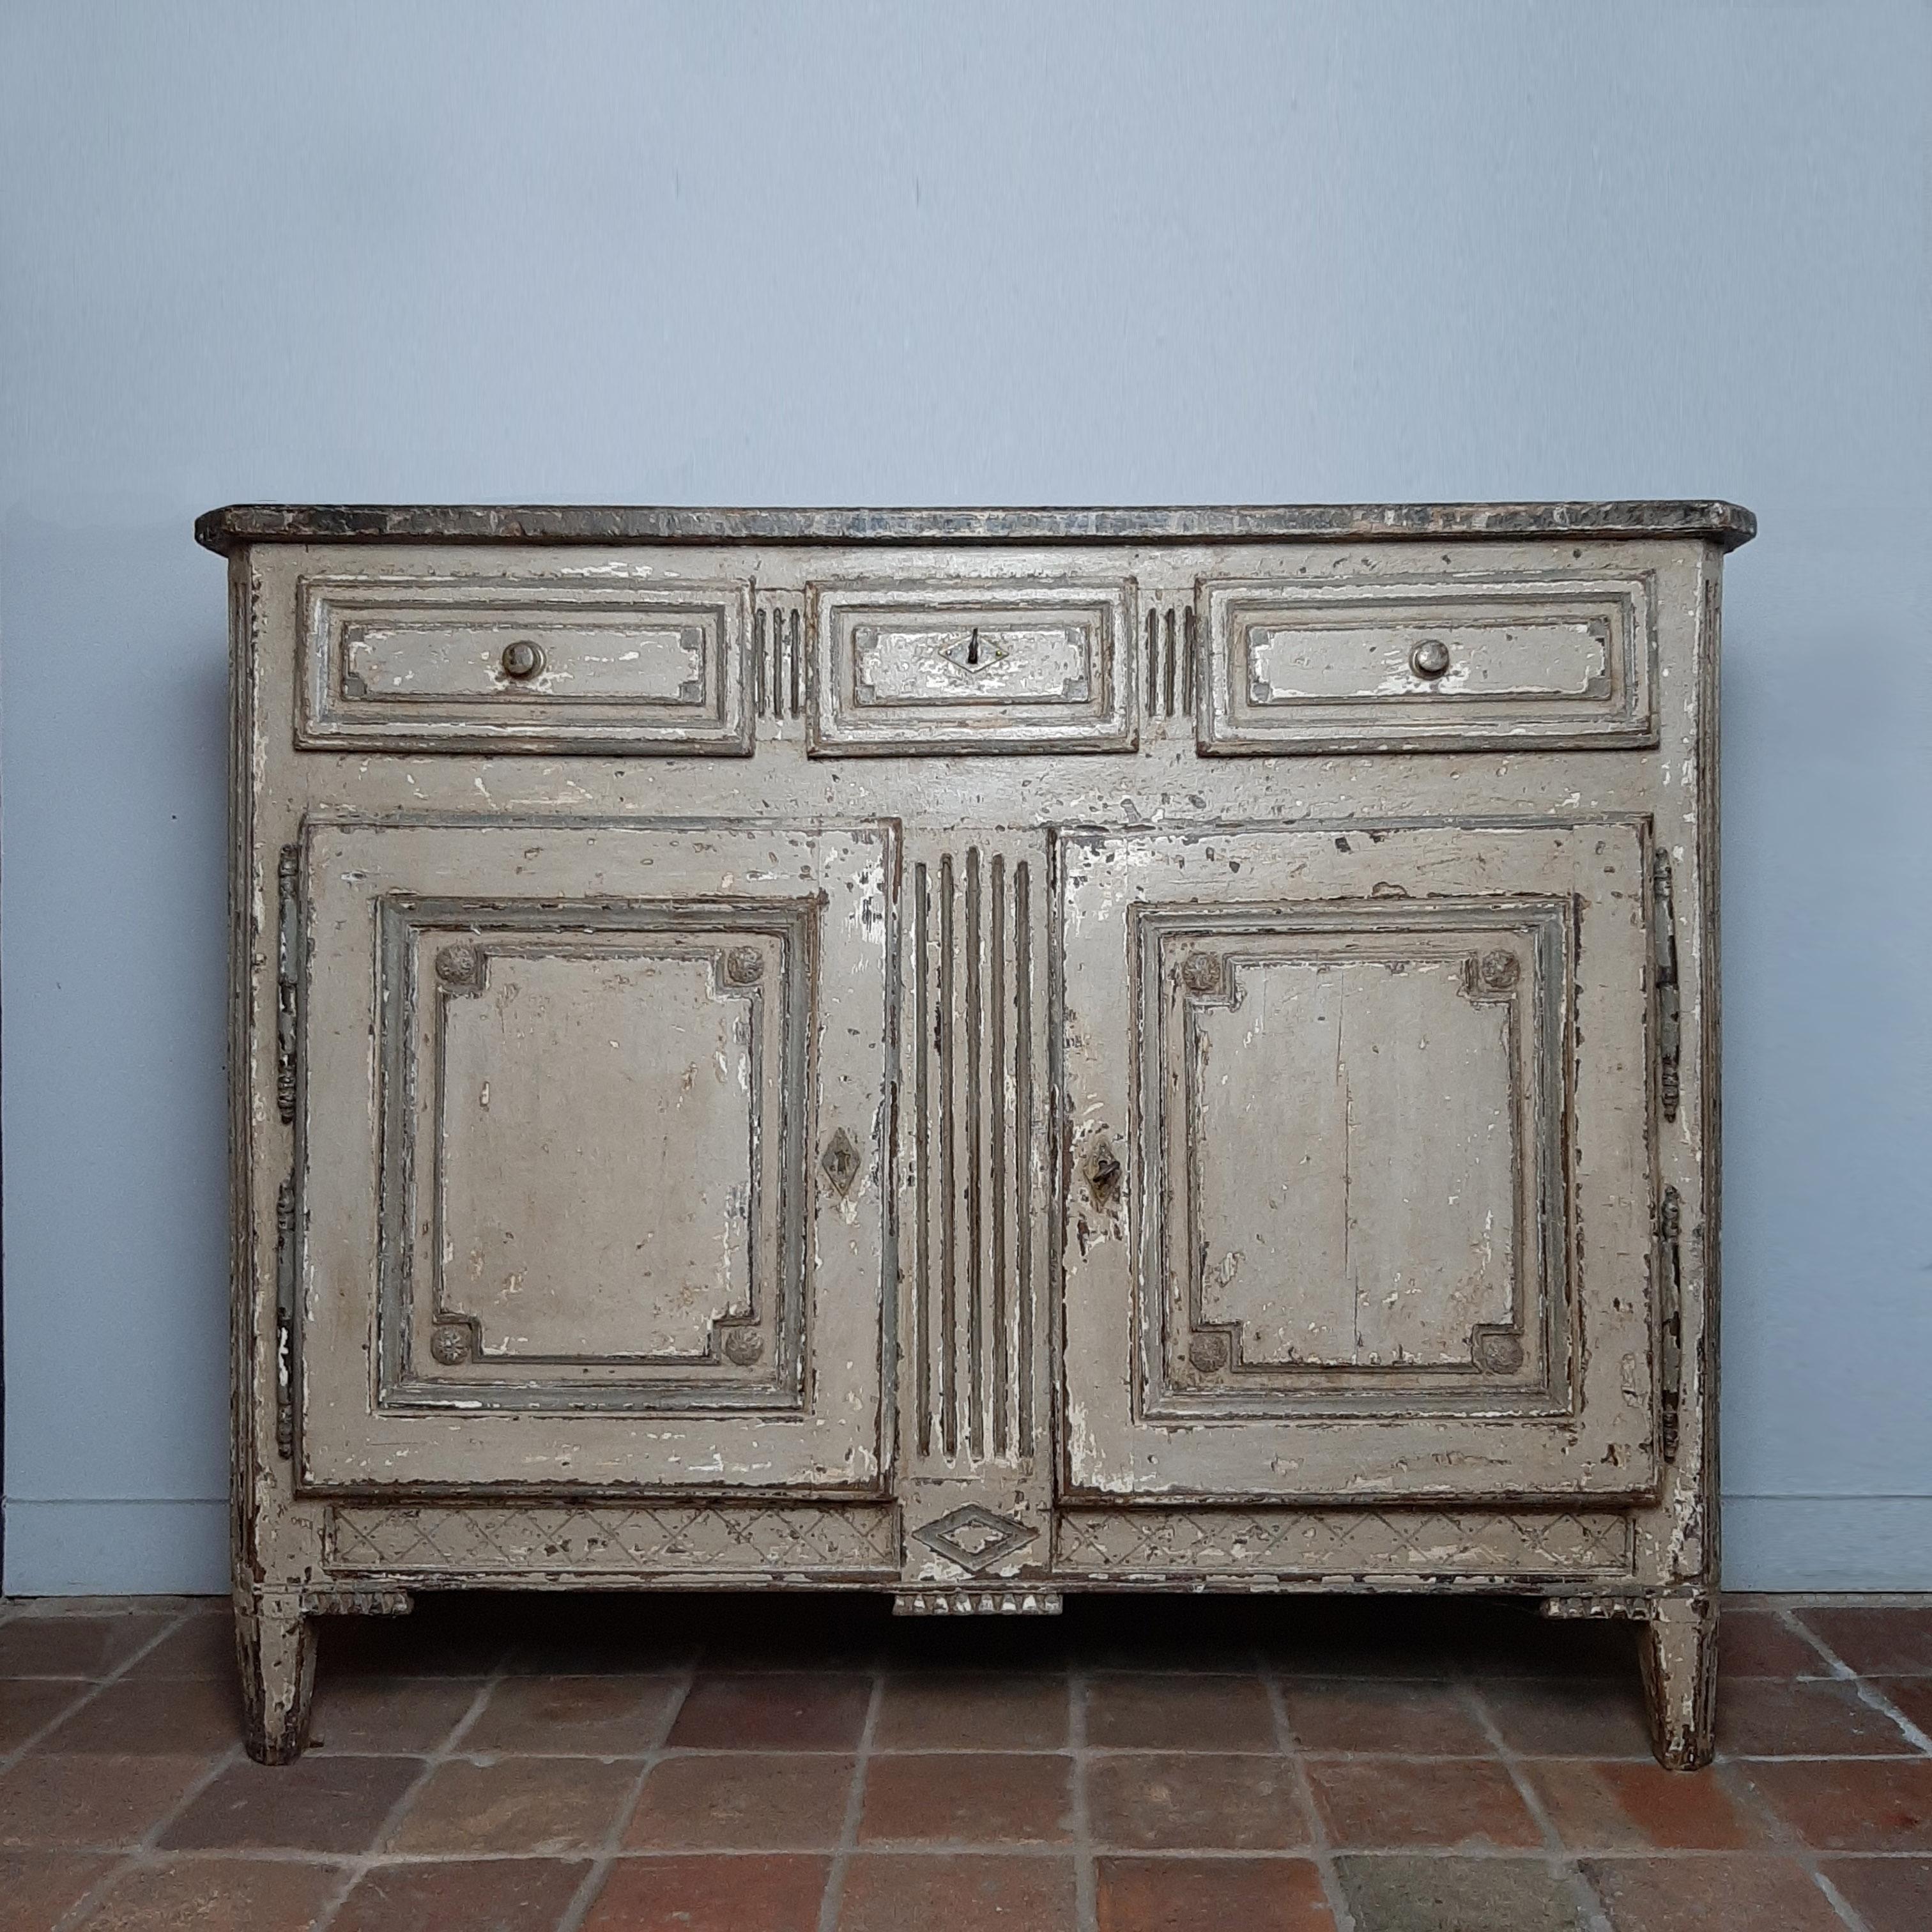 Beautiful antique sideboard from the 19th century, in Louis XVI style. This French cupboard is made of oak and is finished in a beautiful aged greyish beige patina with a hint of green and on the top a marble look finish. The inside is made of